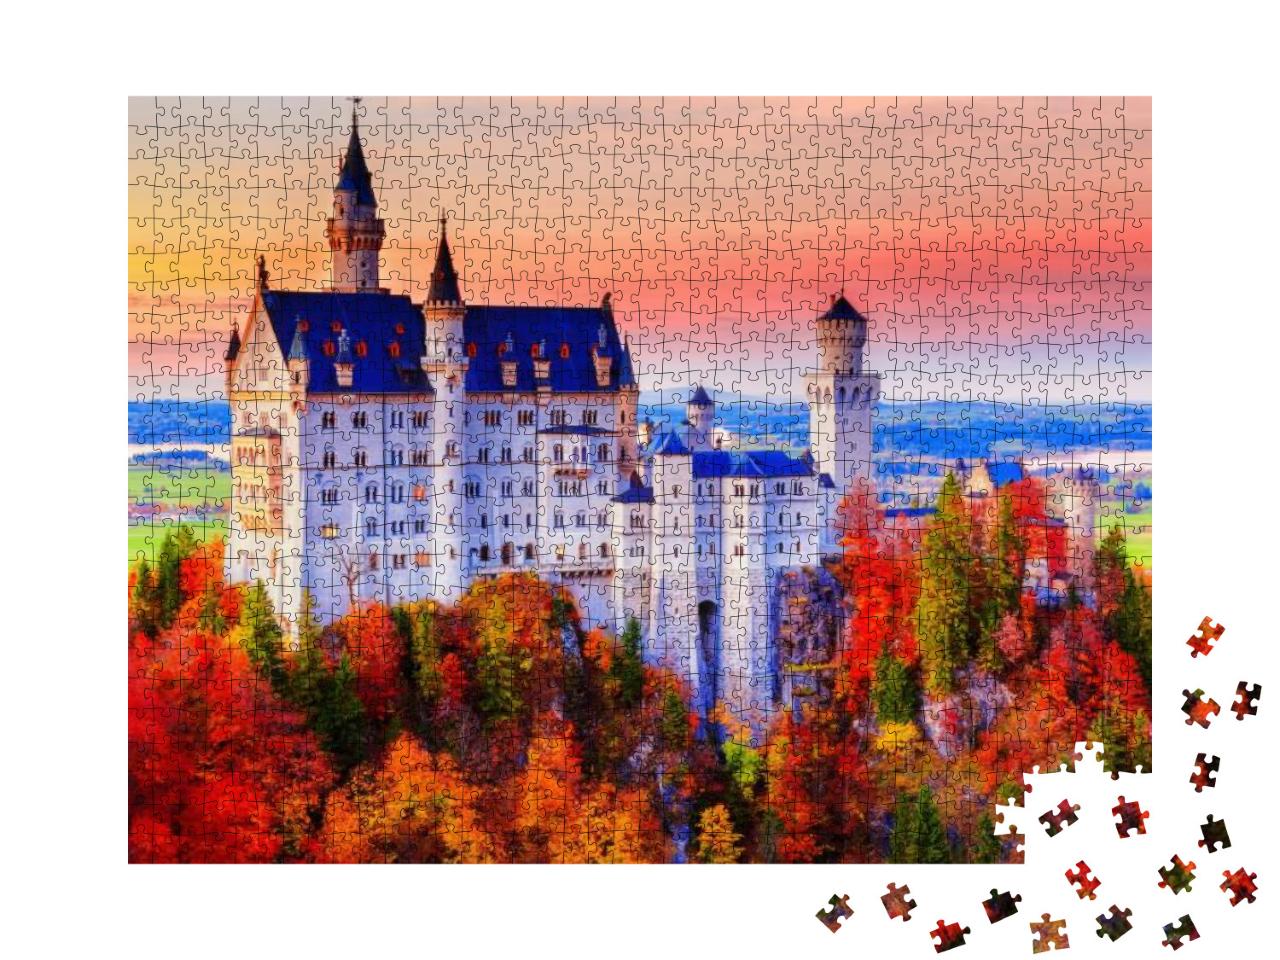 Germany. Famous Neuschwanstein Castle in the Background o... Jigsaw Puzzle with 1000 pieces